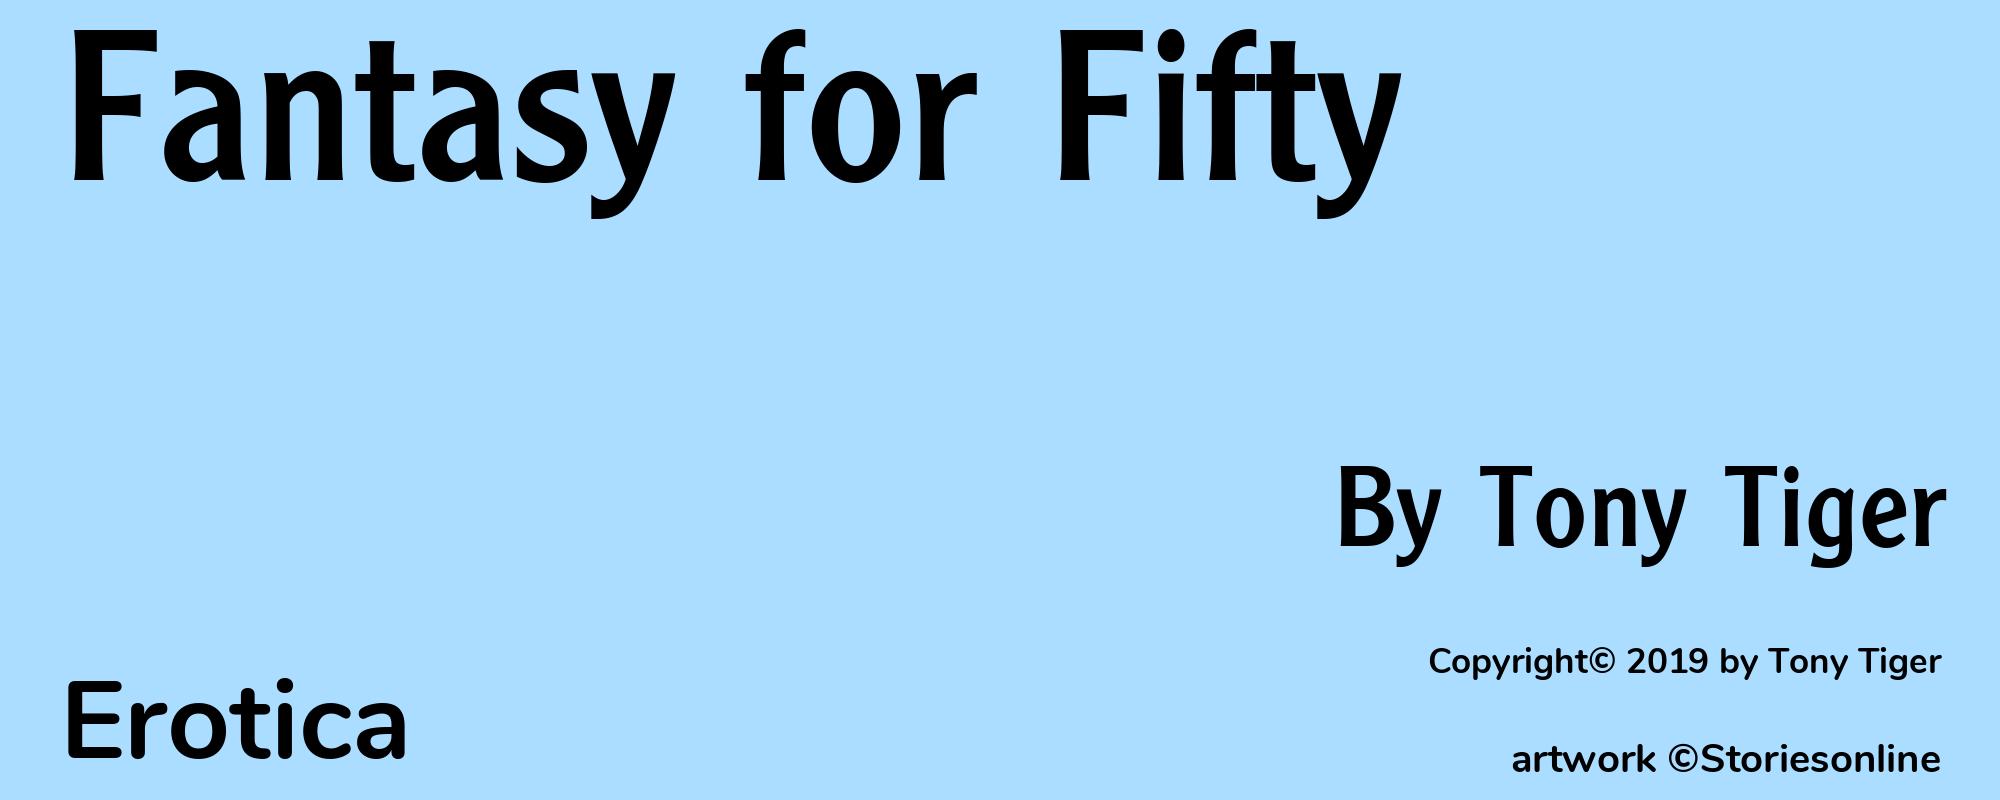 Fantasy for Fifty - Cover